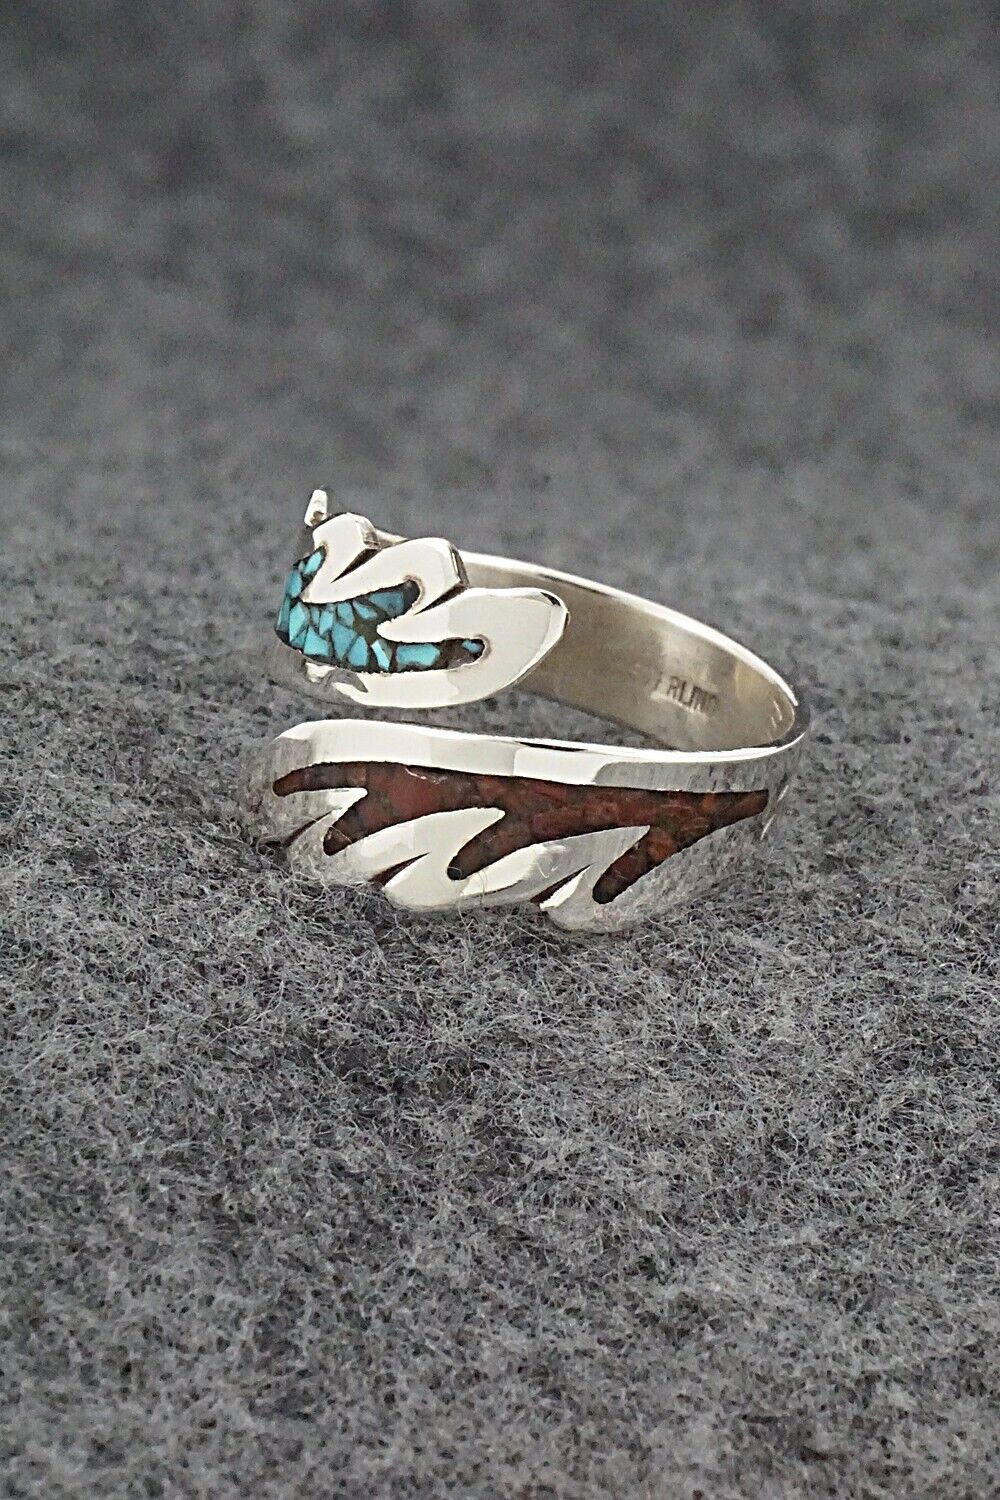 Turquoise, Coral & Sterling Silver Ring - Jolene Yazzie - Size 10.5